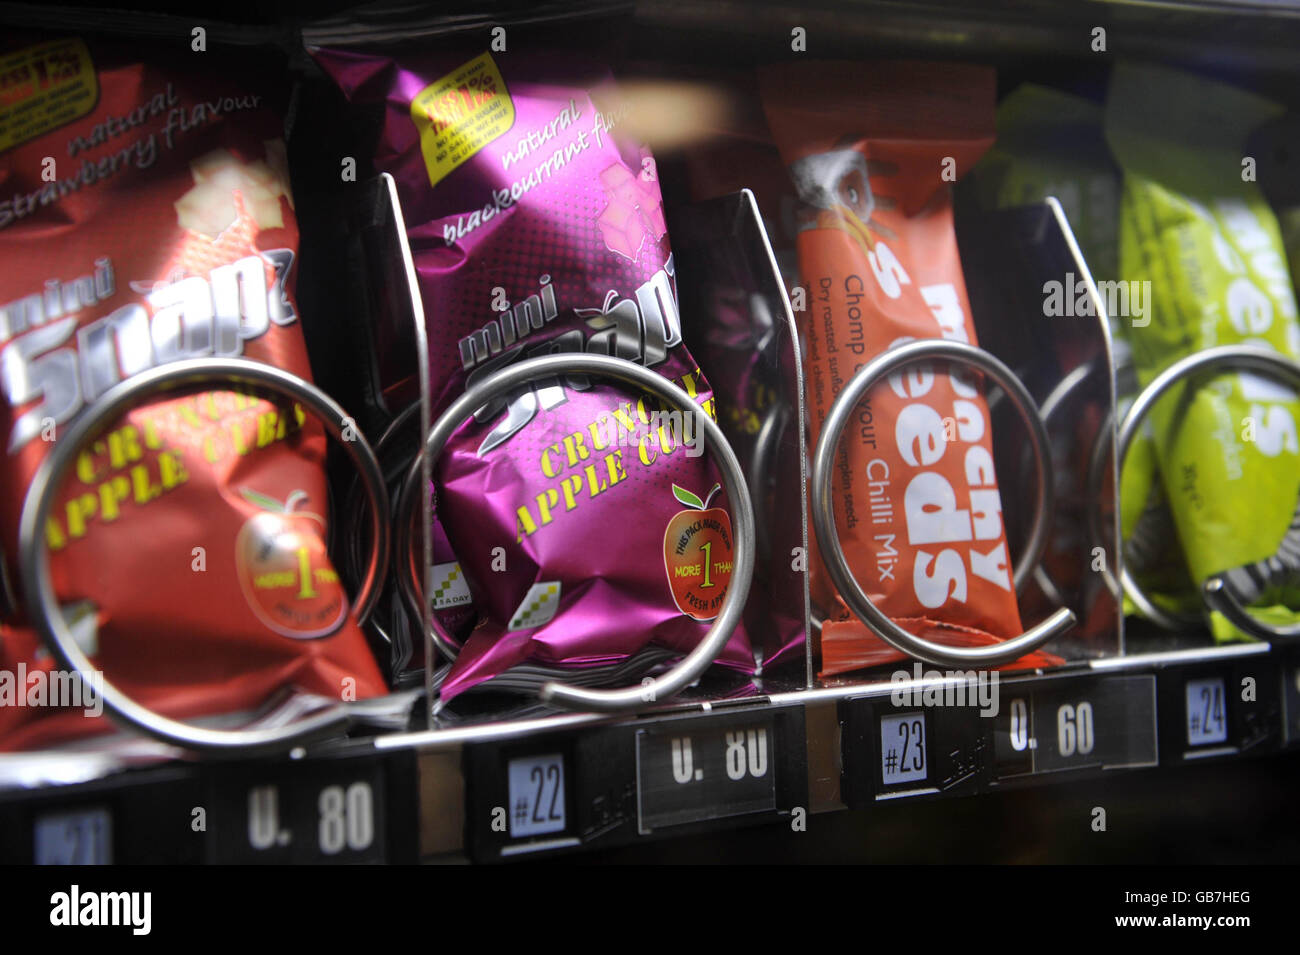 A healthy vending machine containing seed bars and low fat crisps in a Welsh hospital. Stock Photo